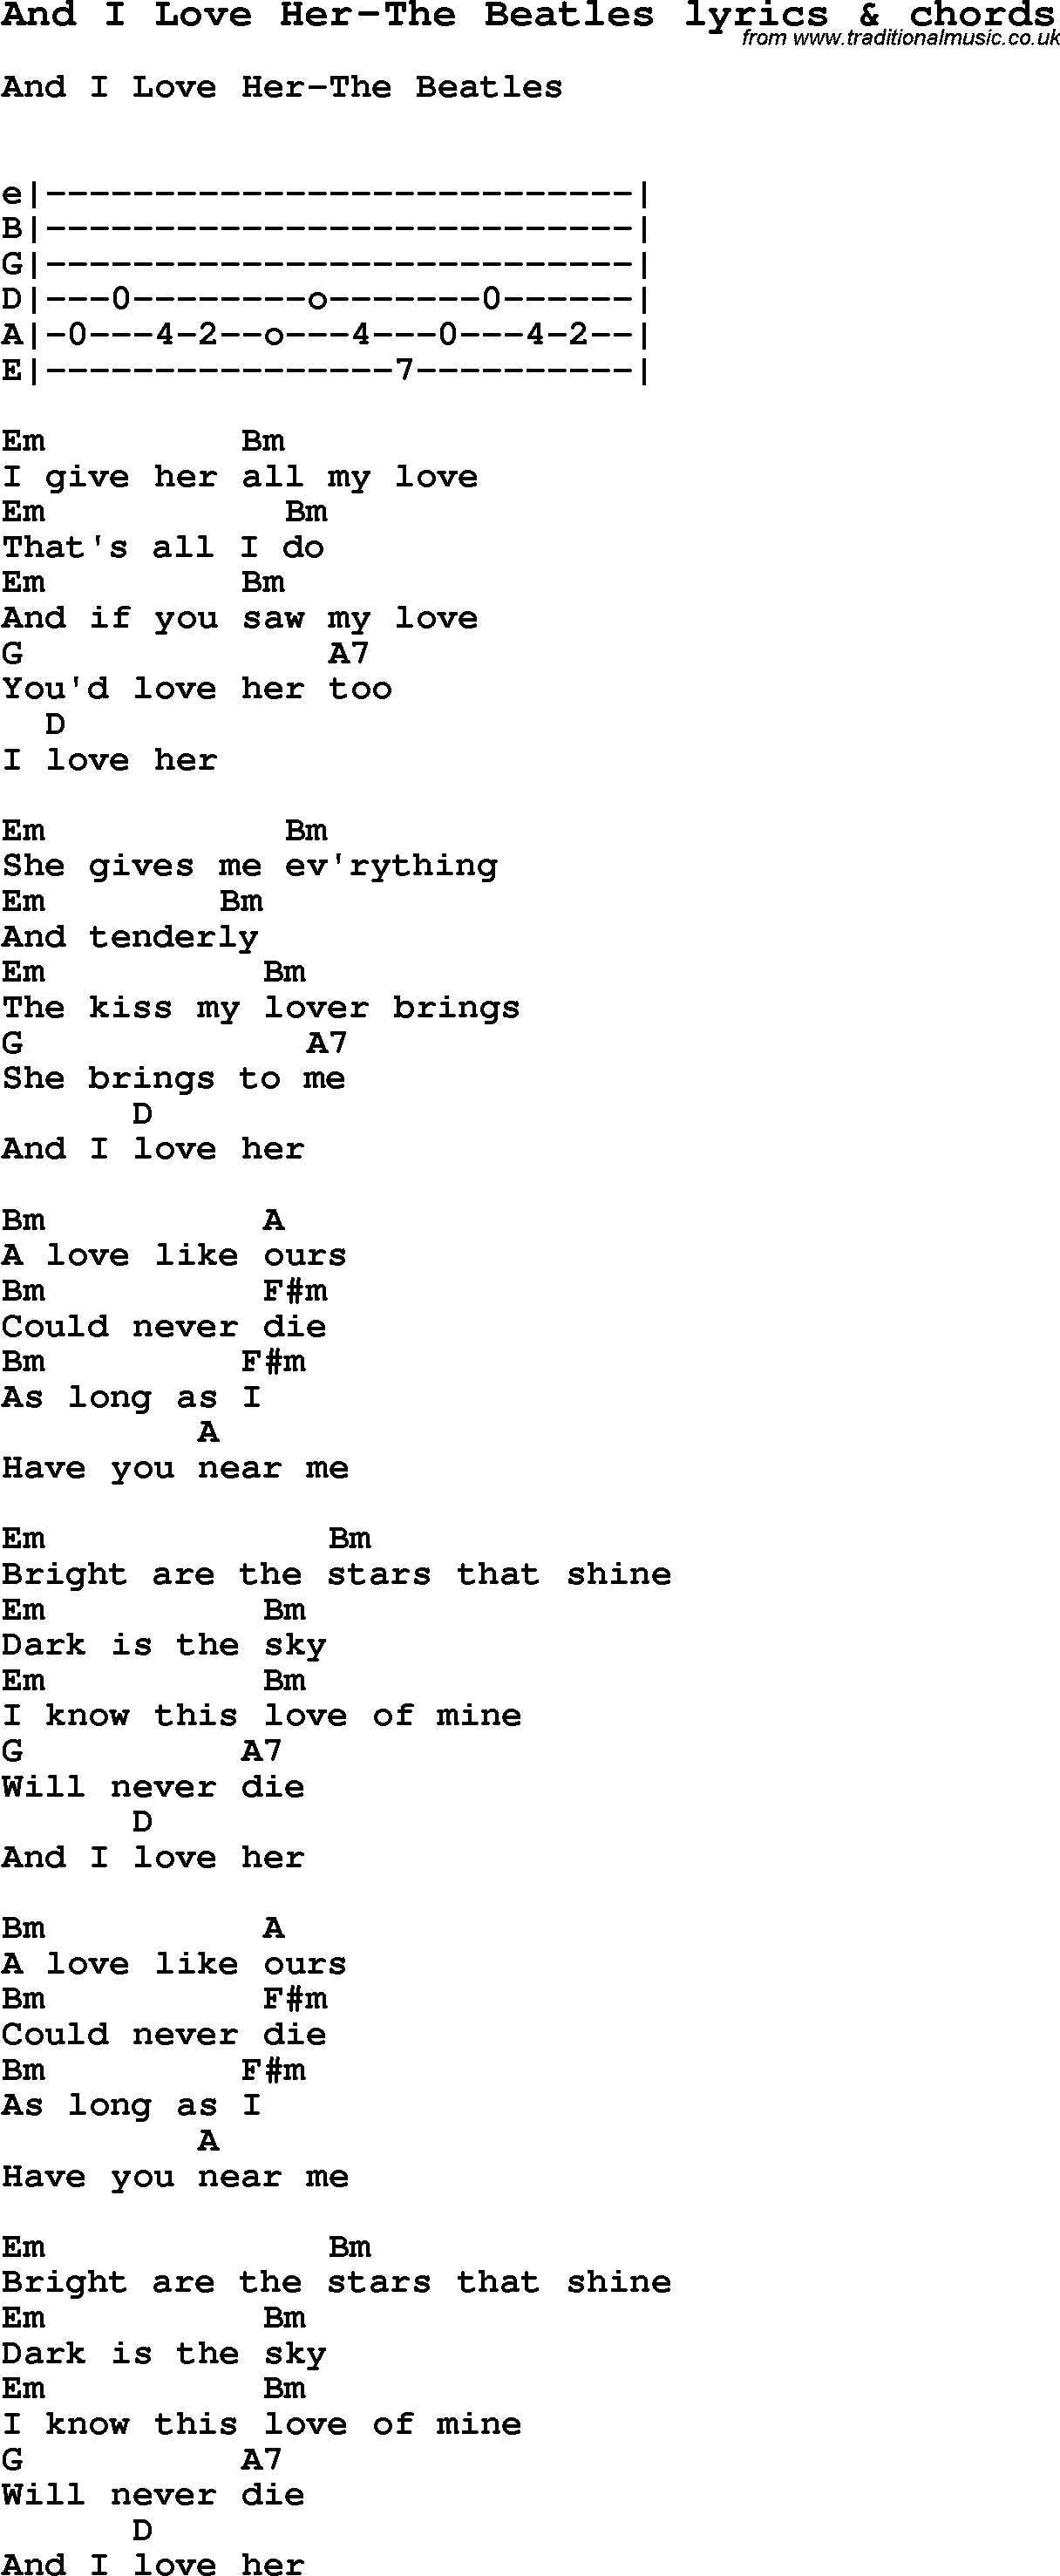 Love Song Lyrics For:and I Love Her-The Beatles With Chords. - Free Printable Song Lyrics With Guitar Chords